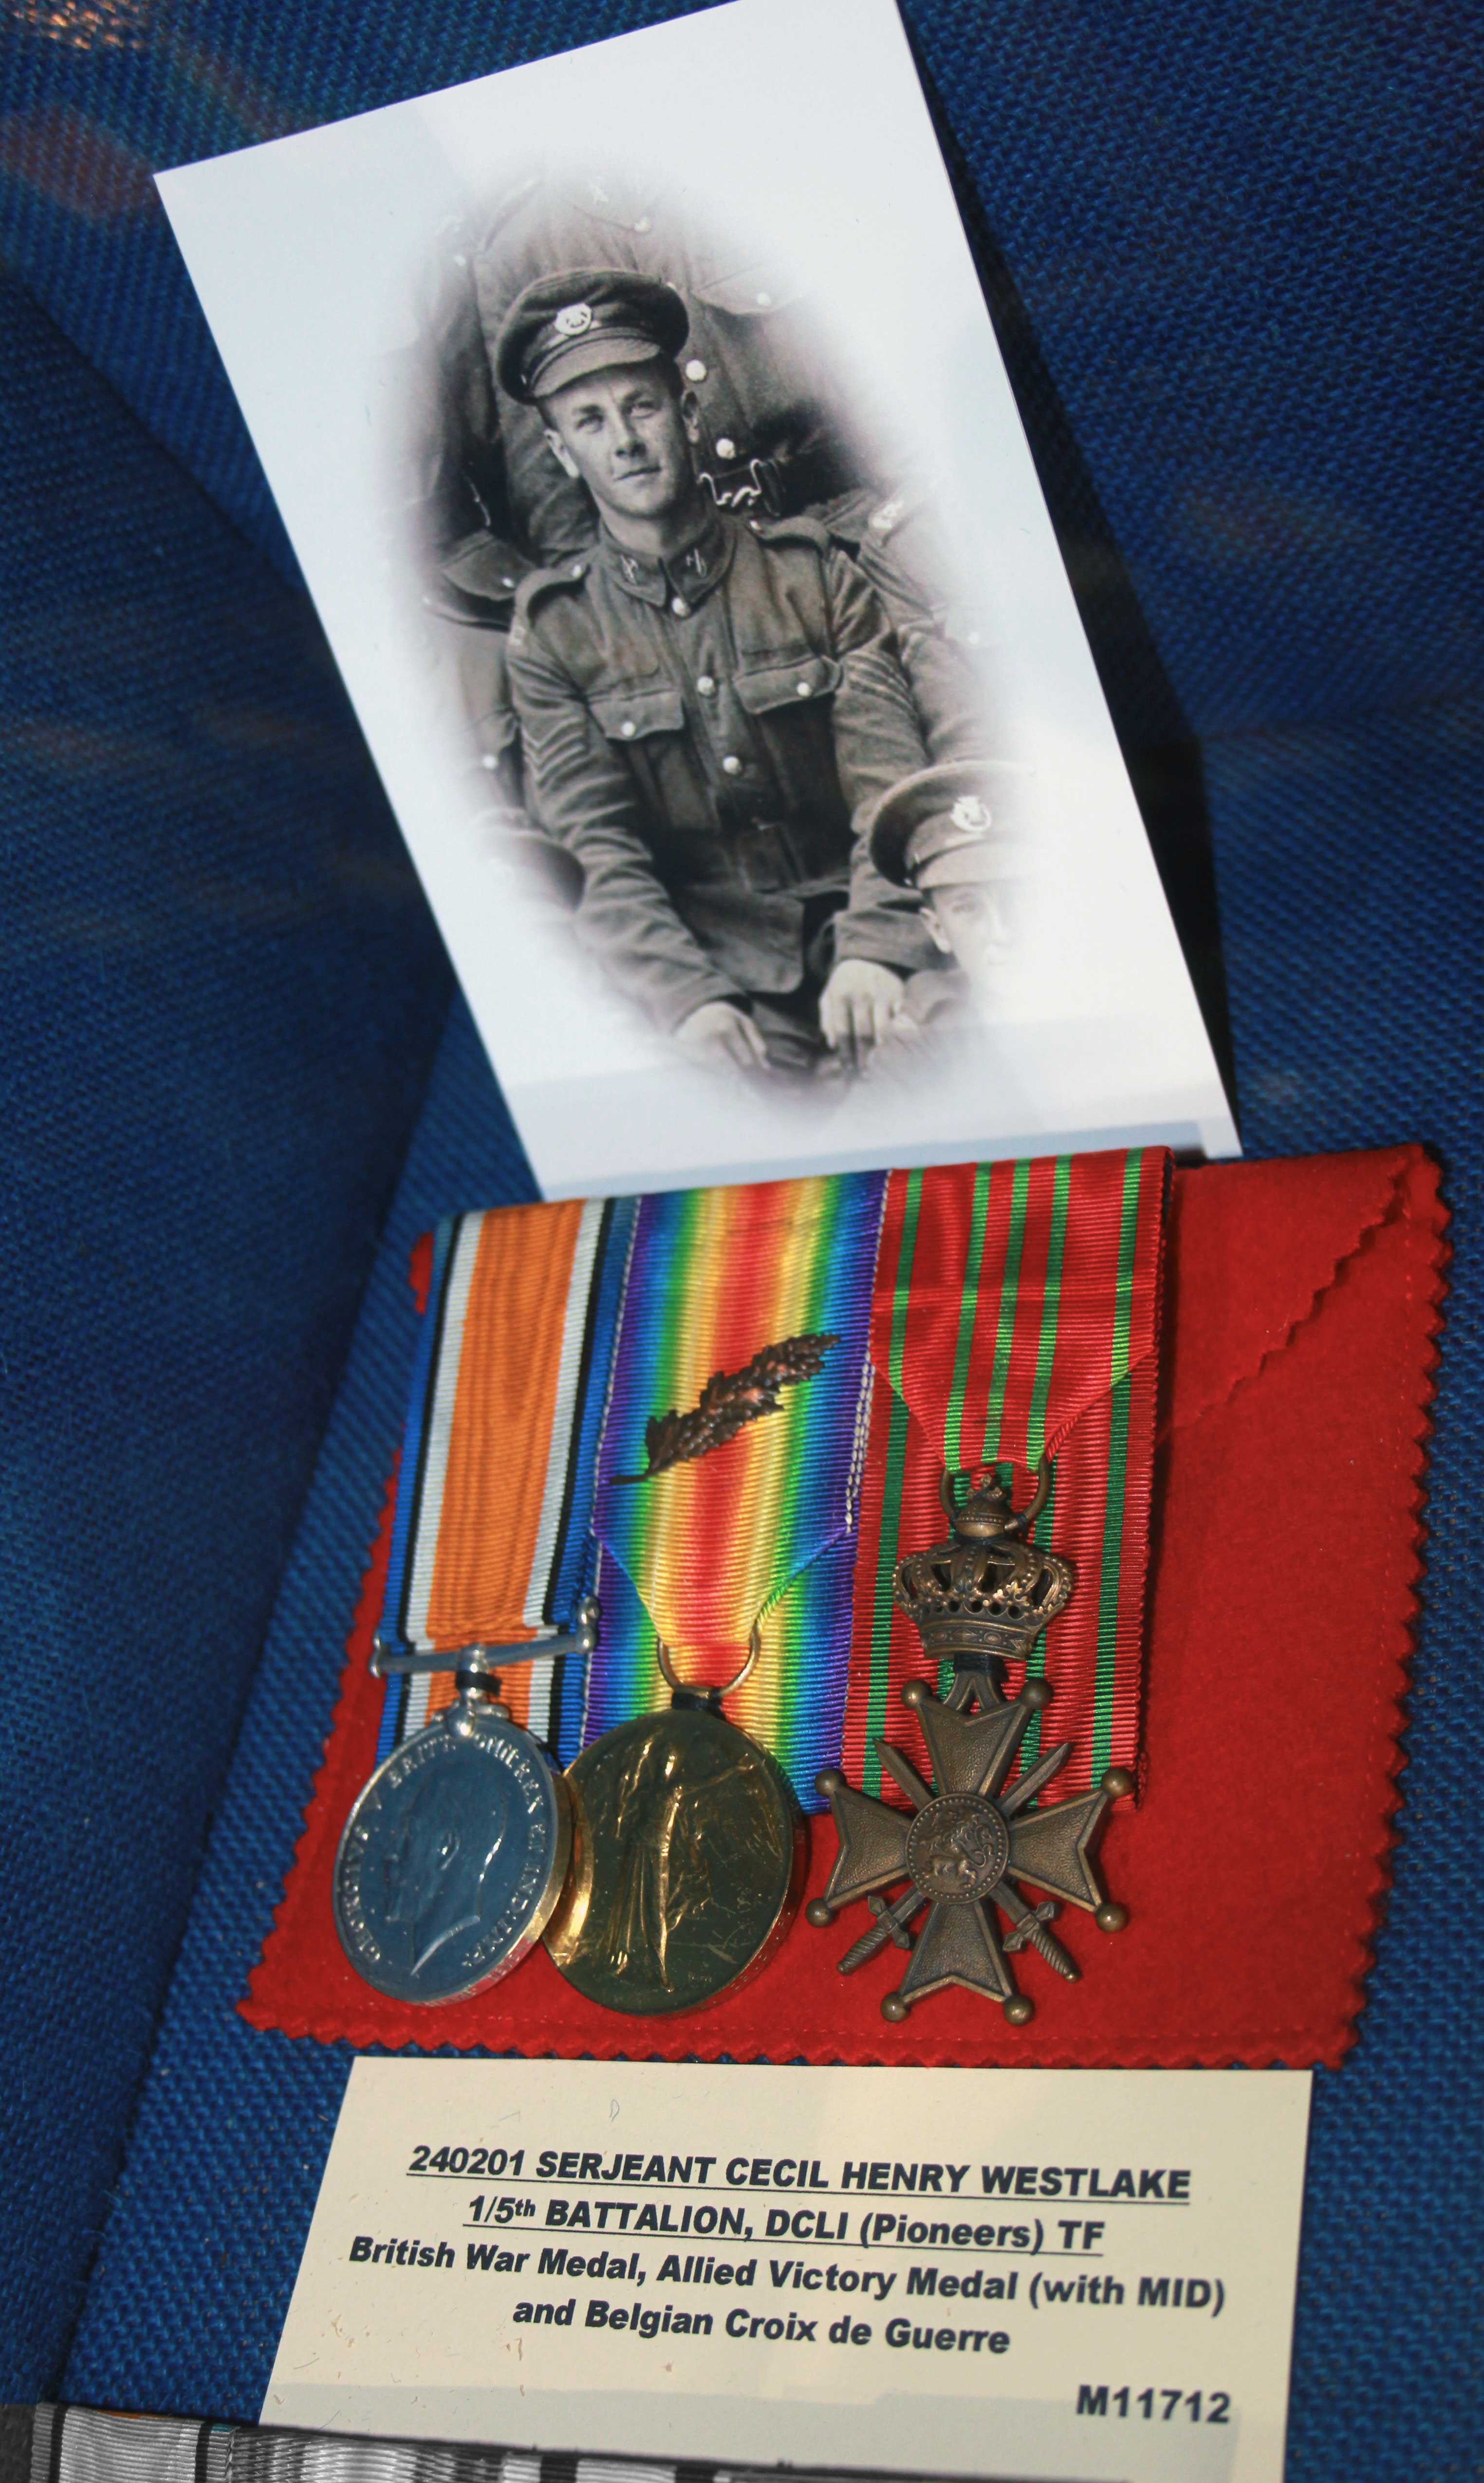 Cecil Westlake's Medals at the Duke of Cornwalls Light Infantry Museum, Bodmin.